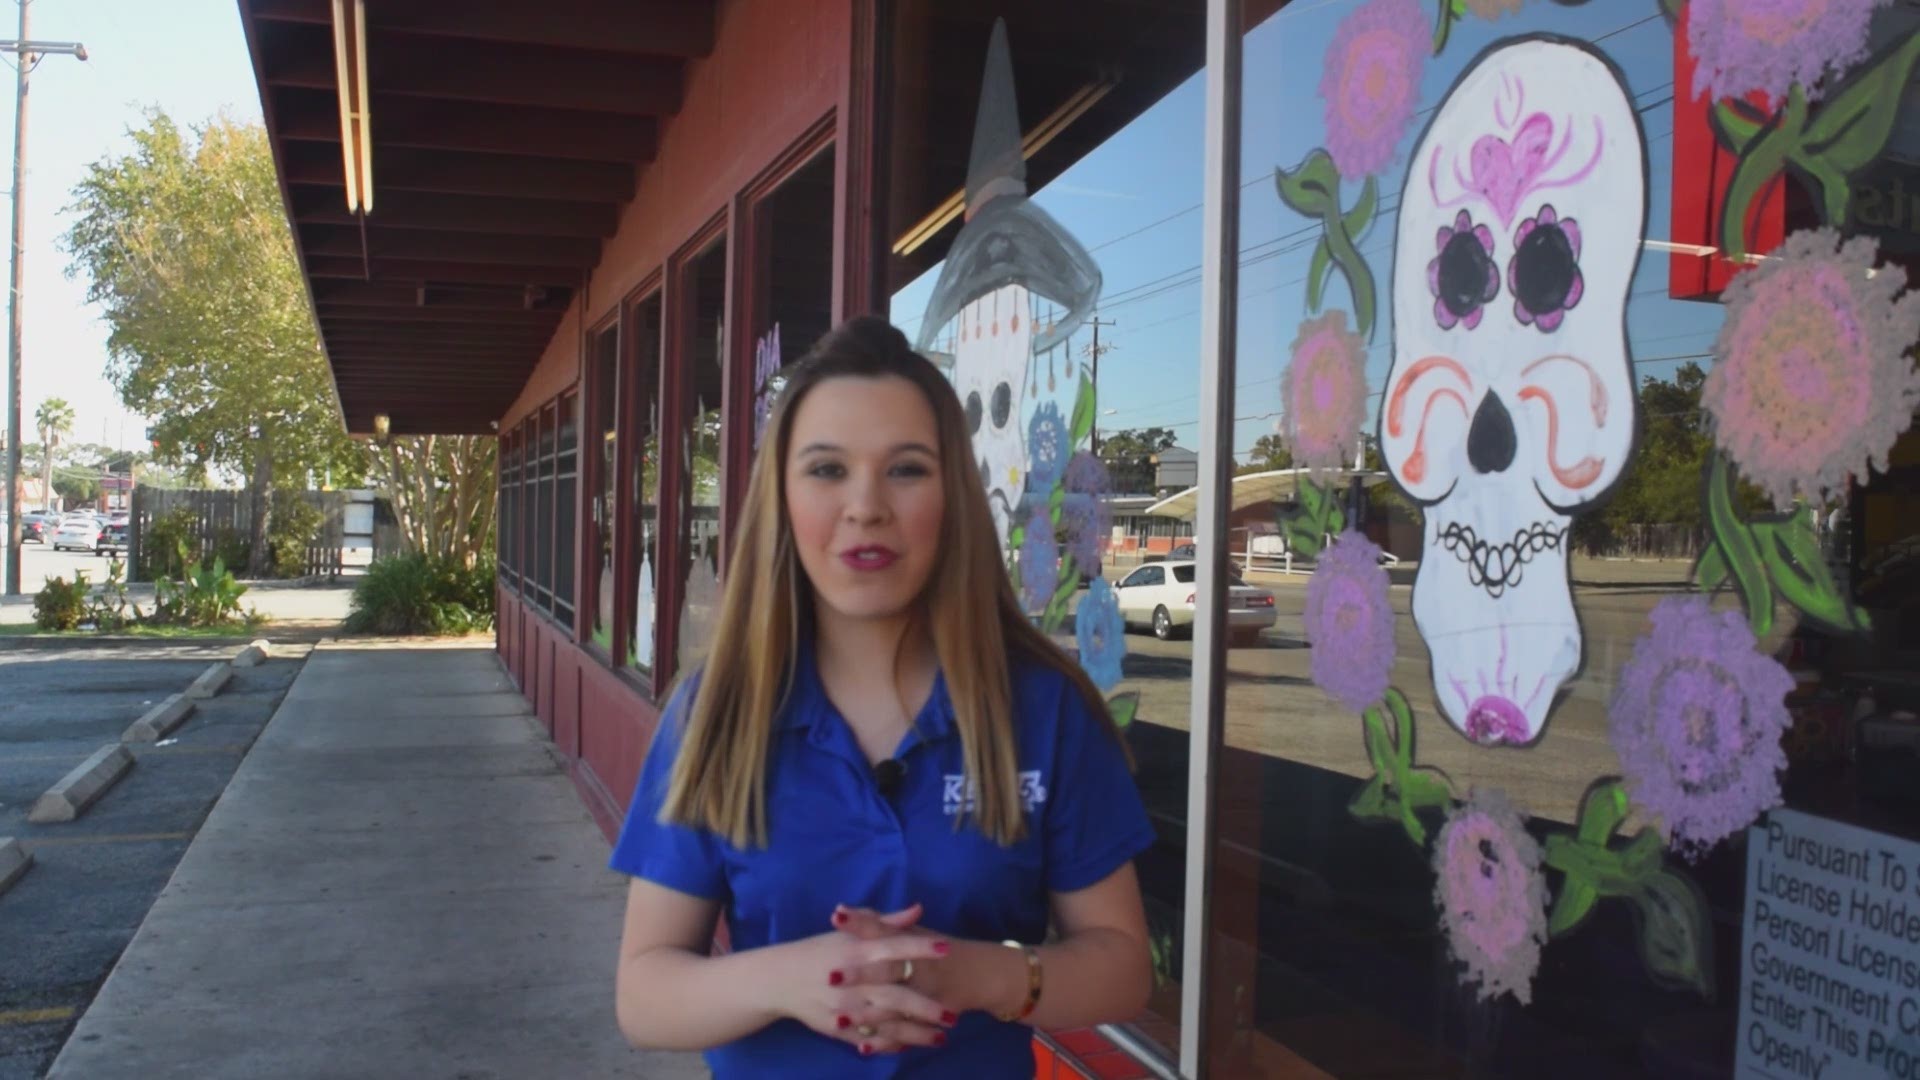 Indulge your sweet tooth with these "sweet" donut shops in the Alamo City. Digital journalist Lexi Hazlett shows you three donut options for National Donut Day.